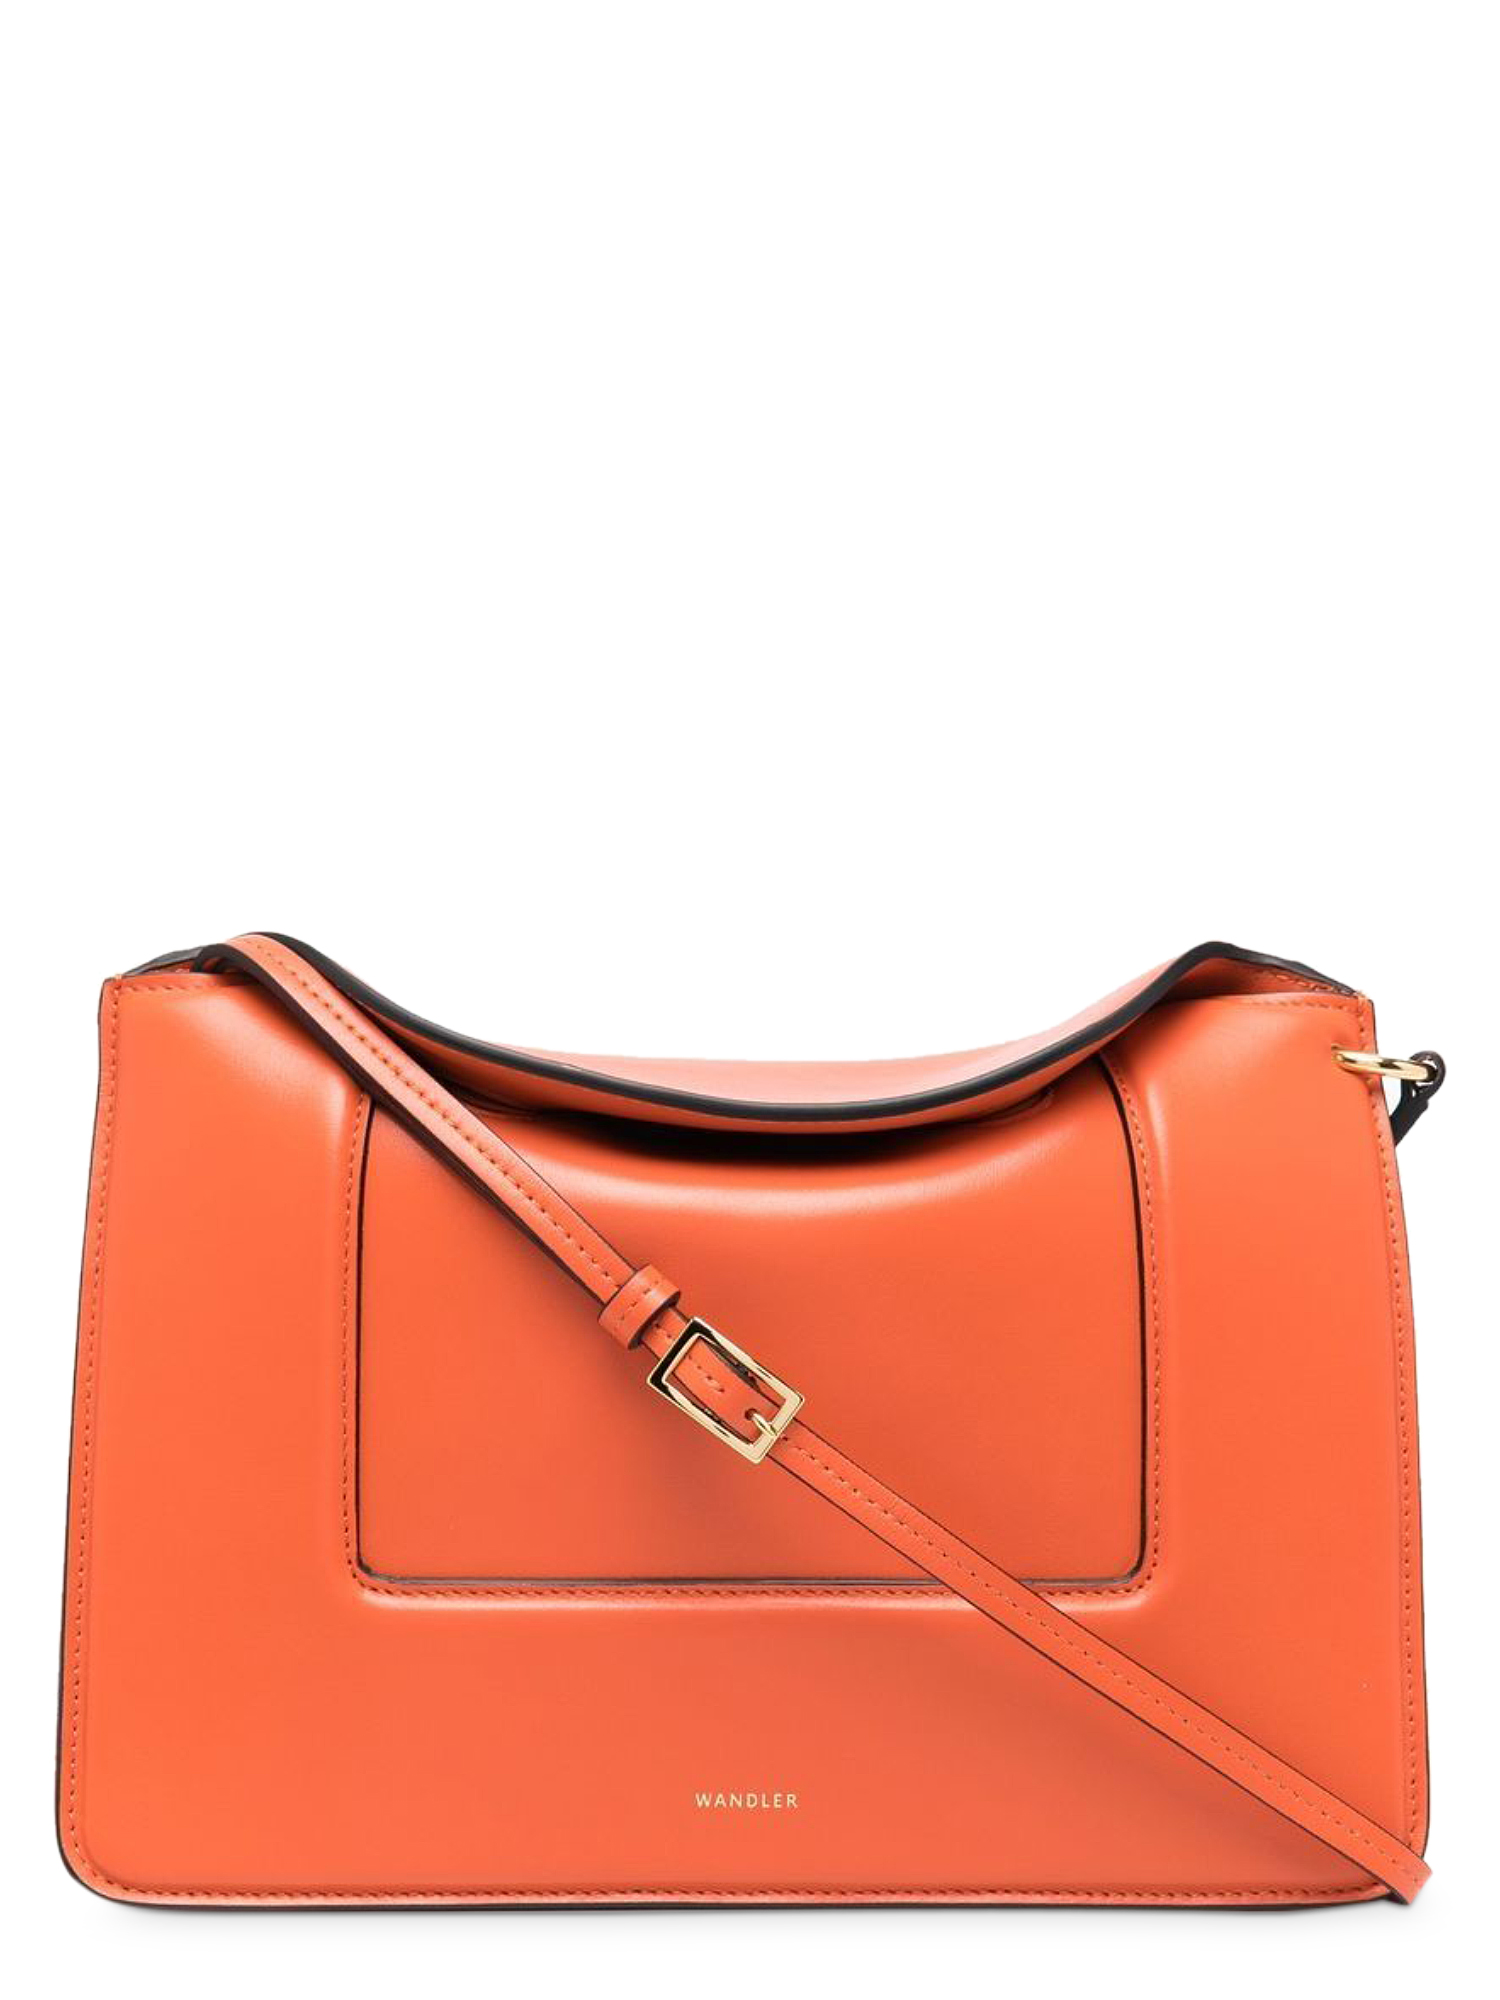 Condition: New With Tag,  Leather, Color: Orange - One-Size-Fits-All -  -